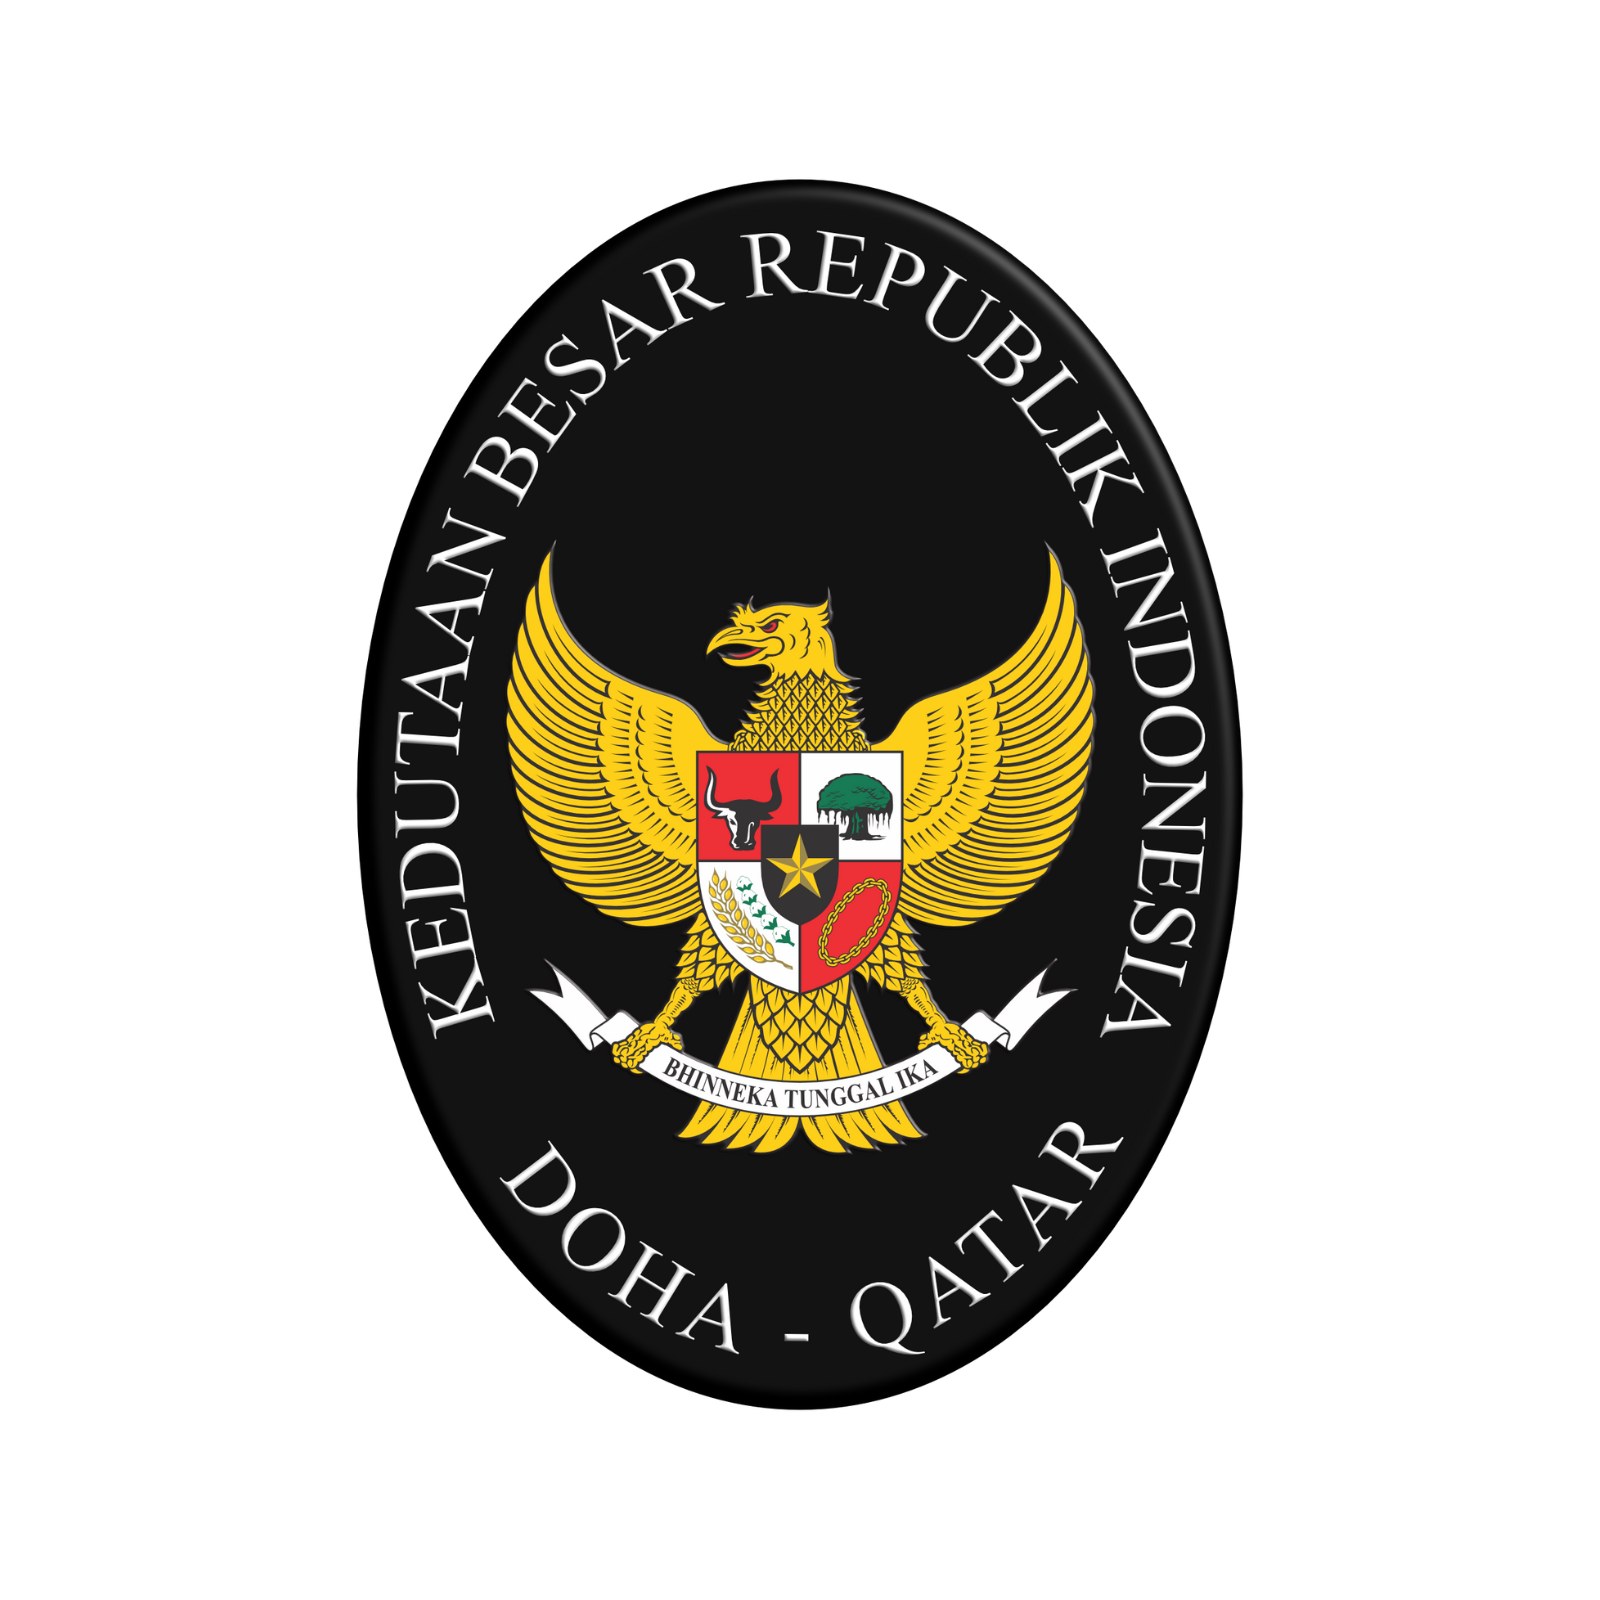 Dialogue of Paper partners: Indonesia Embassy in Qatar